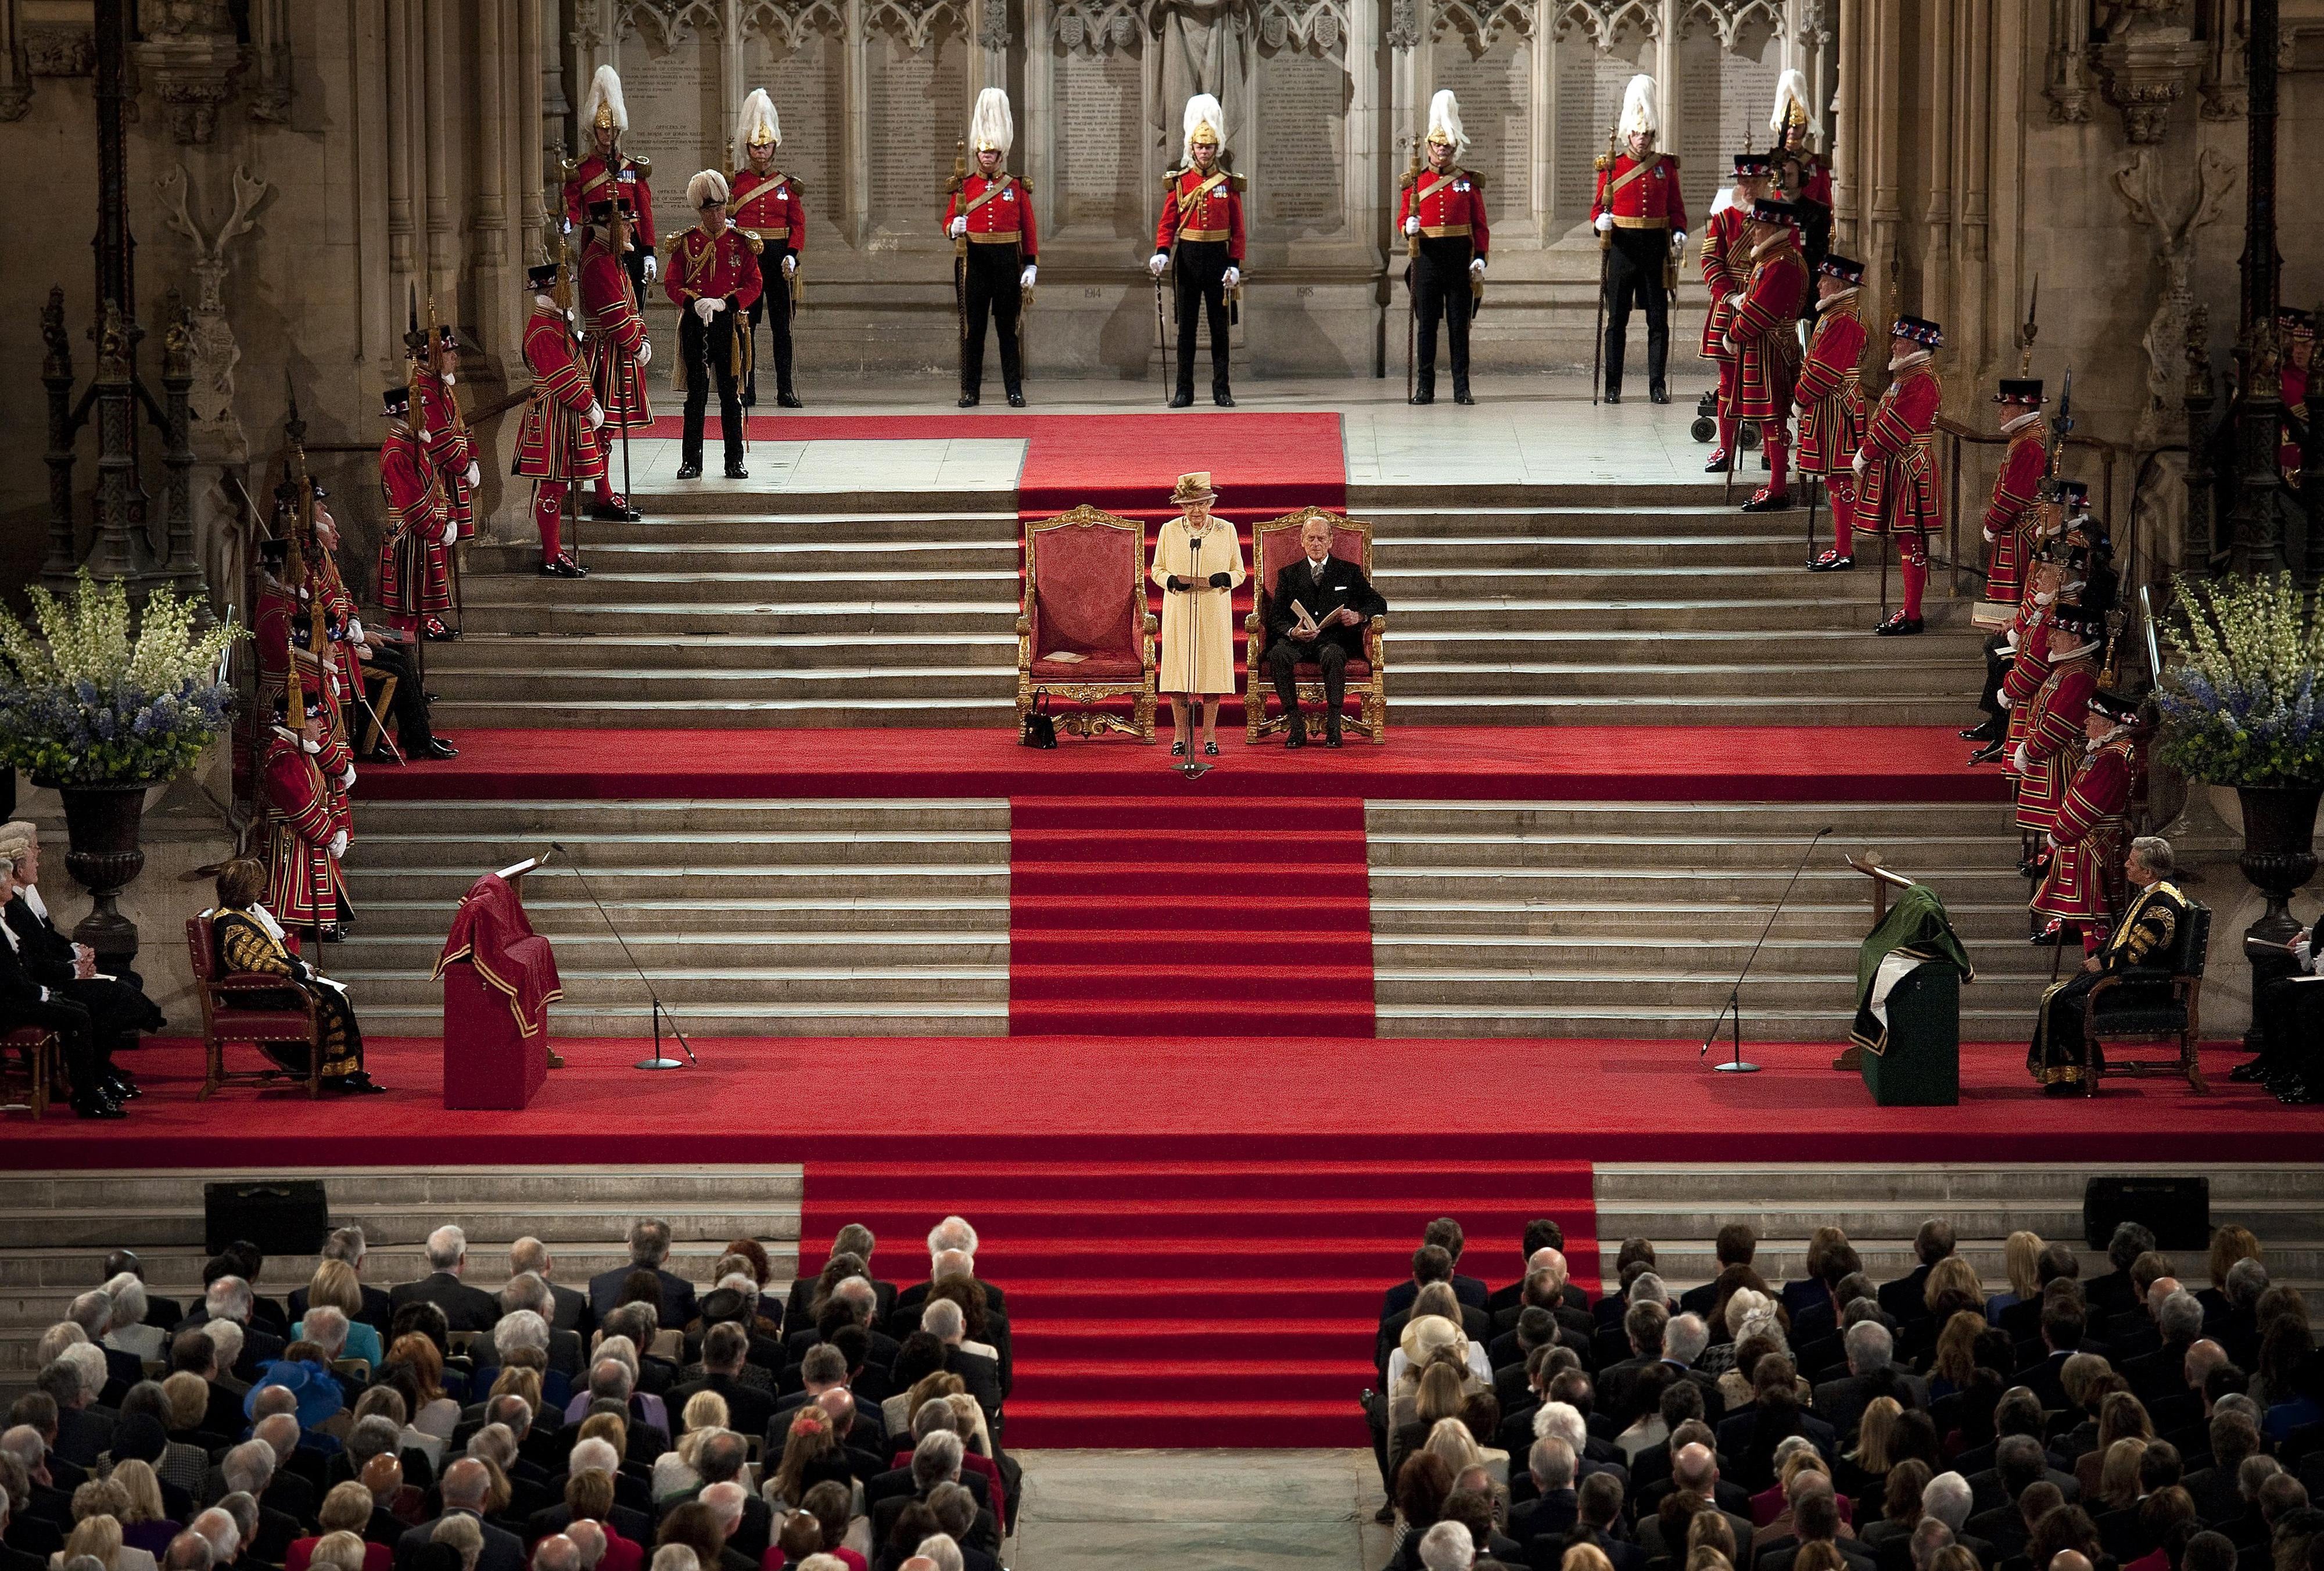 Queen Elizabeth II addressing both Houses of Parliament in Westminster Hall as part of her visit to mark her Diamond Jubilee year (Ben Stansall/PA)